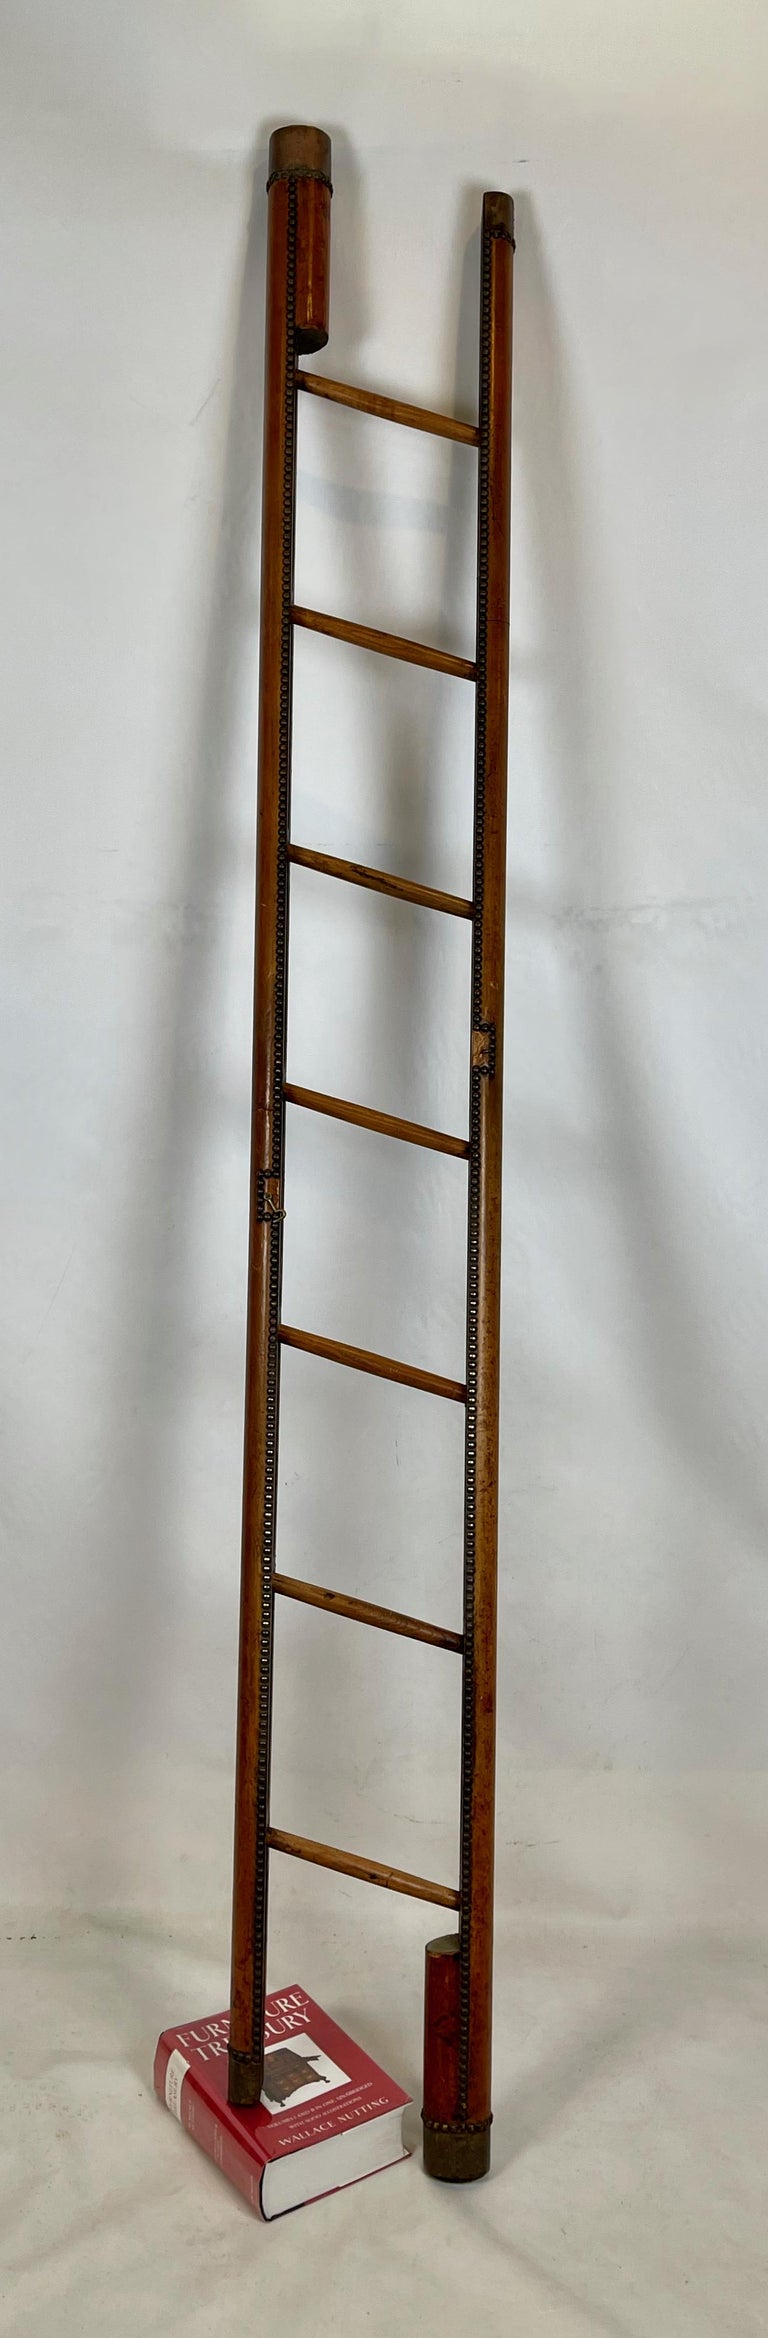 Early 20th Century English Leather Clad Folding Pole Ladder For Sale 5